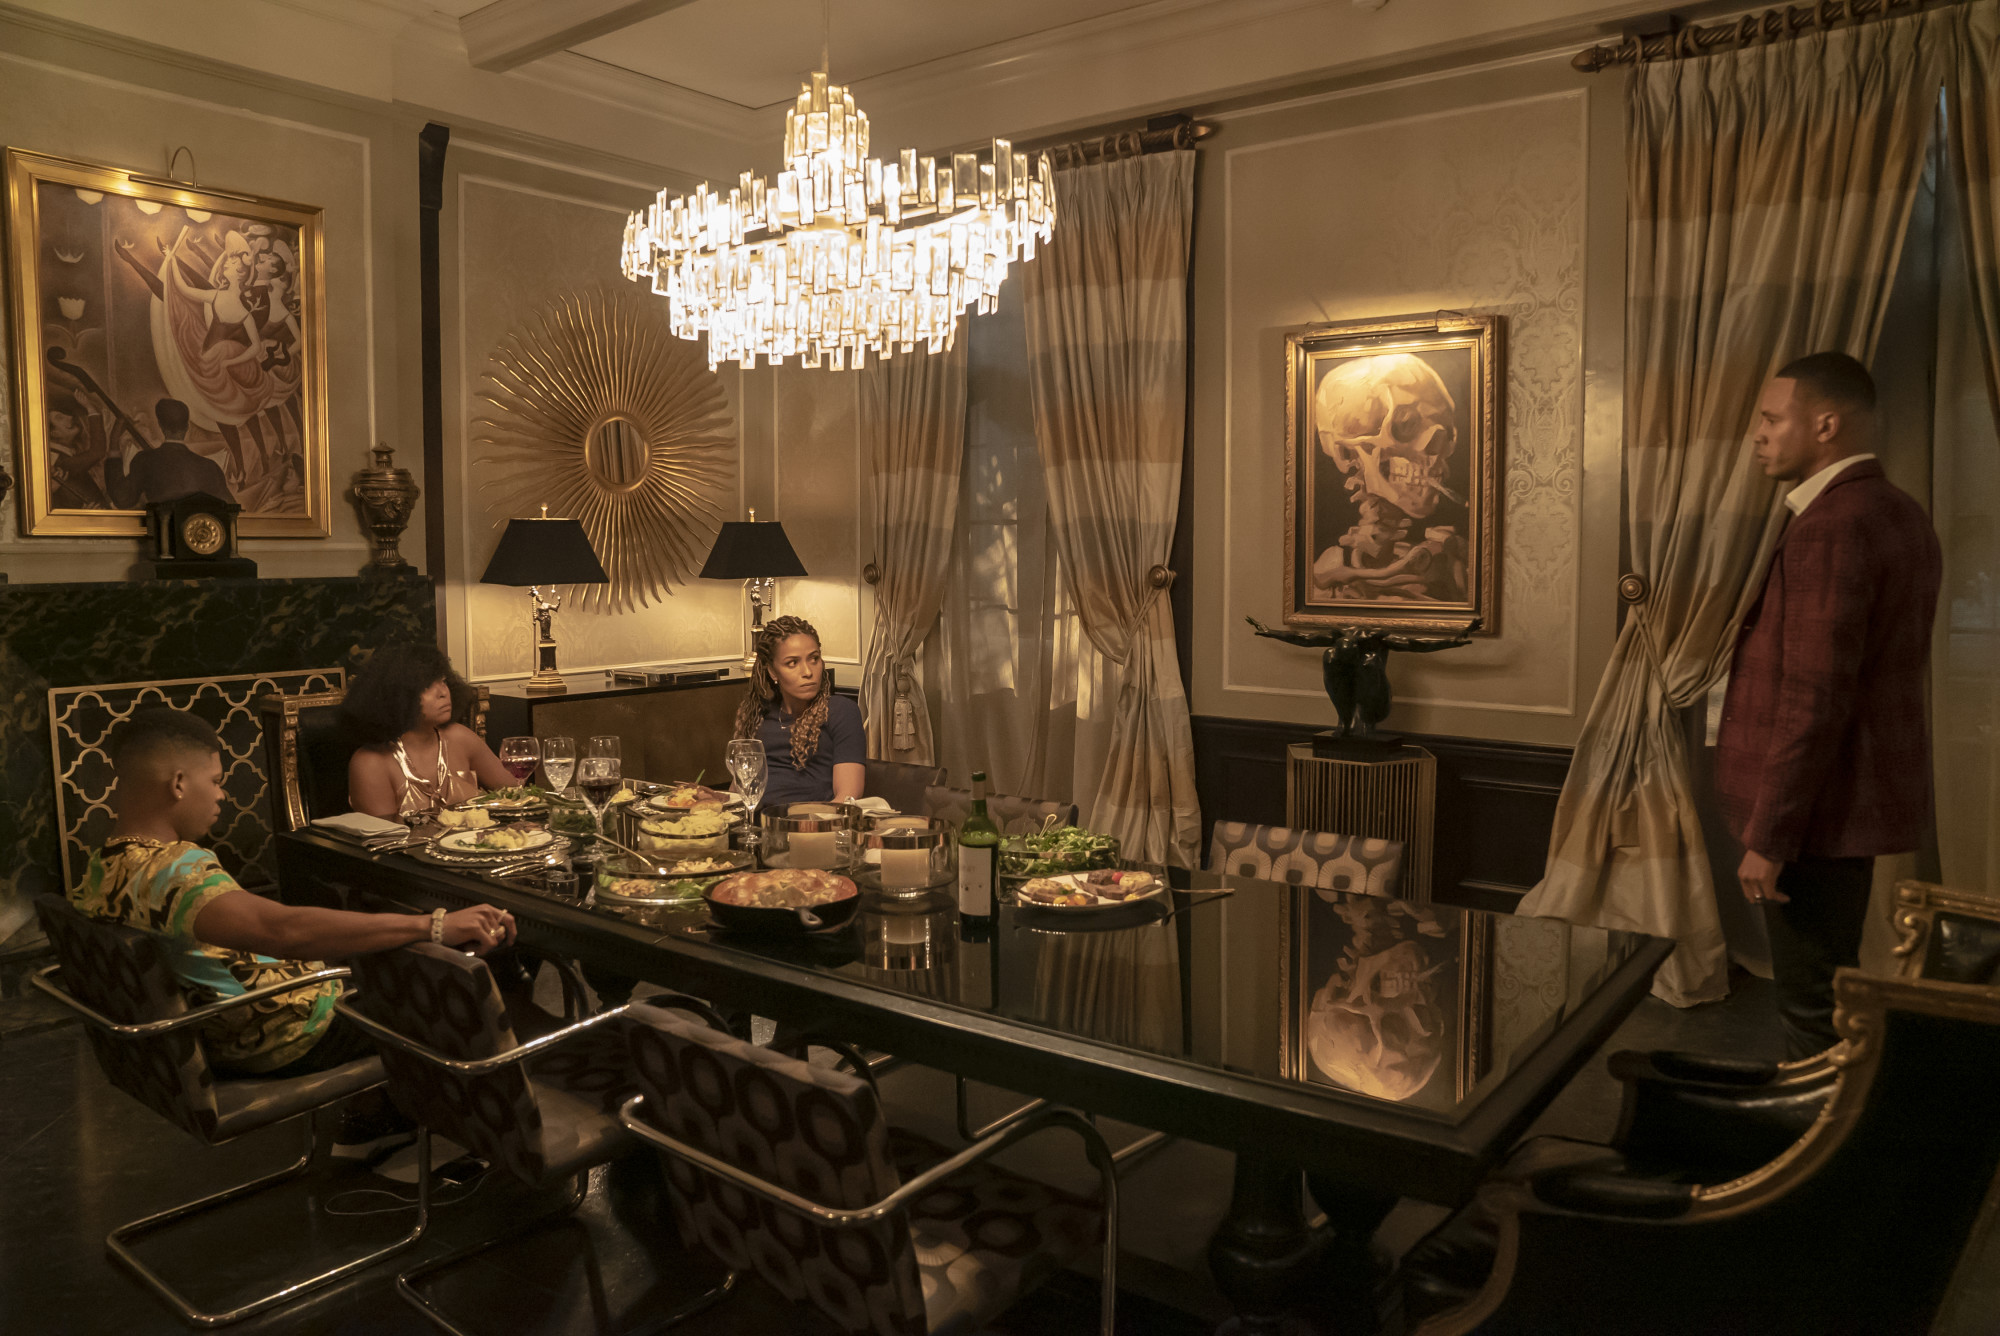 EMPIRE: L-R: Bryshere Y. Gray, Taraji P. Henson, Meta Golding and Trai Byers in the "What Is Love" season premiere episode of EMPIRE airing Tuesday, Sept. 24 (9:00-10:00 PM ET/PT) on FOX. ©2019 Fox Broadcasting Co. All Rights Reserved. CR: Chuck Hodes/FOX.